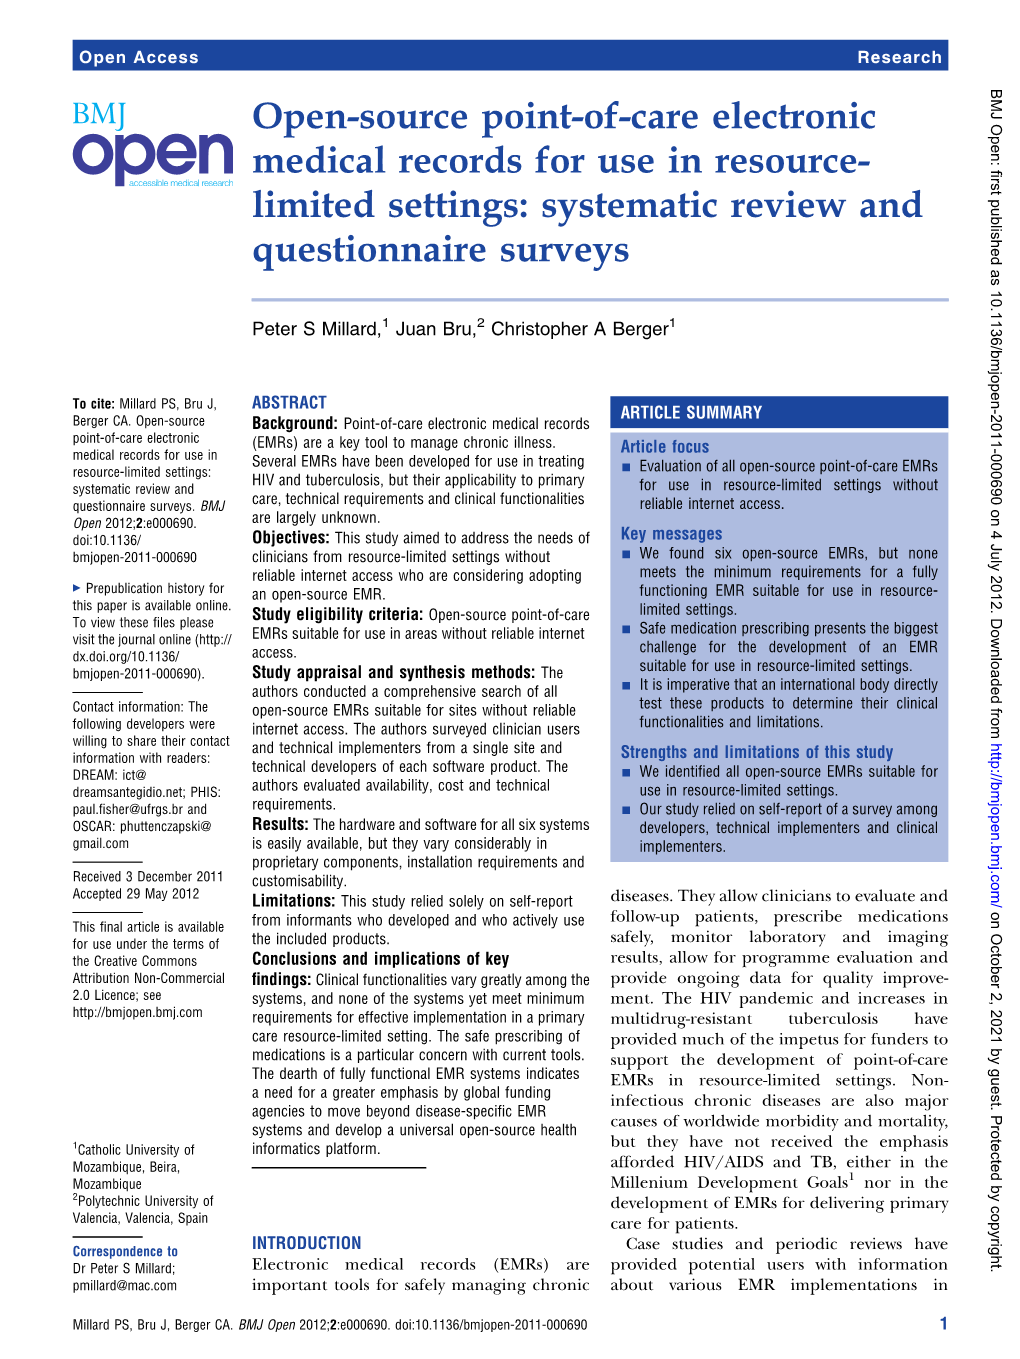 Open-Source Point-Of-Care Electronic Medical Records for Use in Resource- Limited Settings: Systematic Review and Questionnaire Surveys